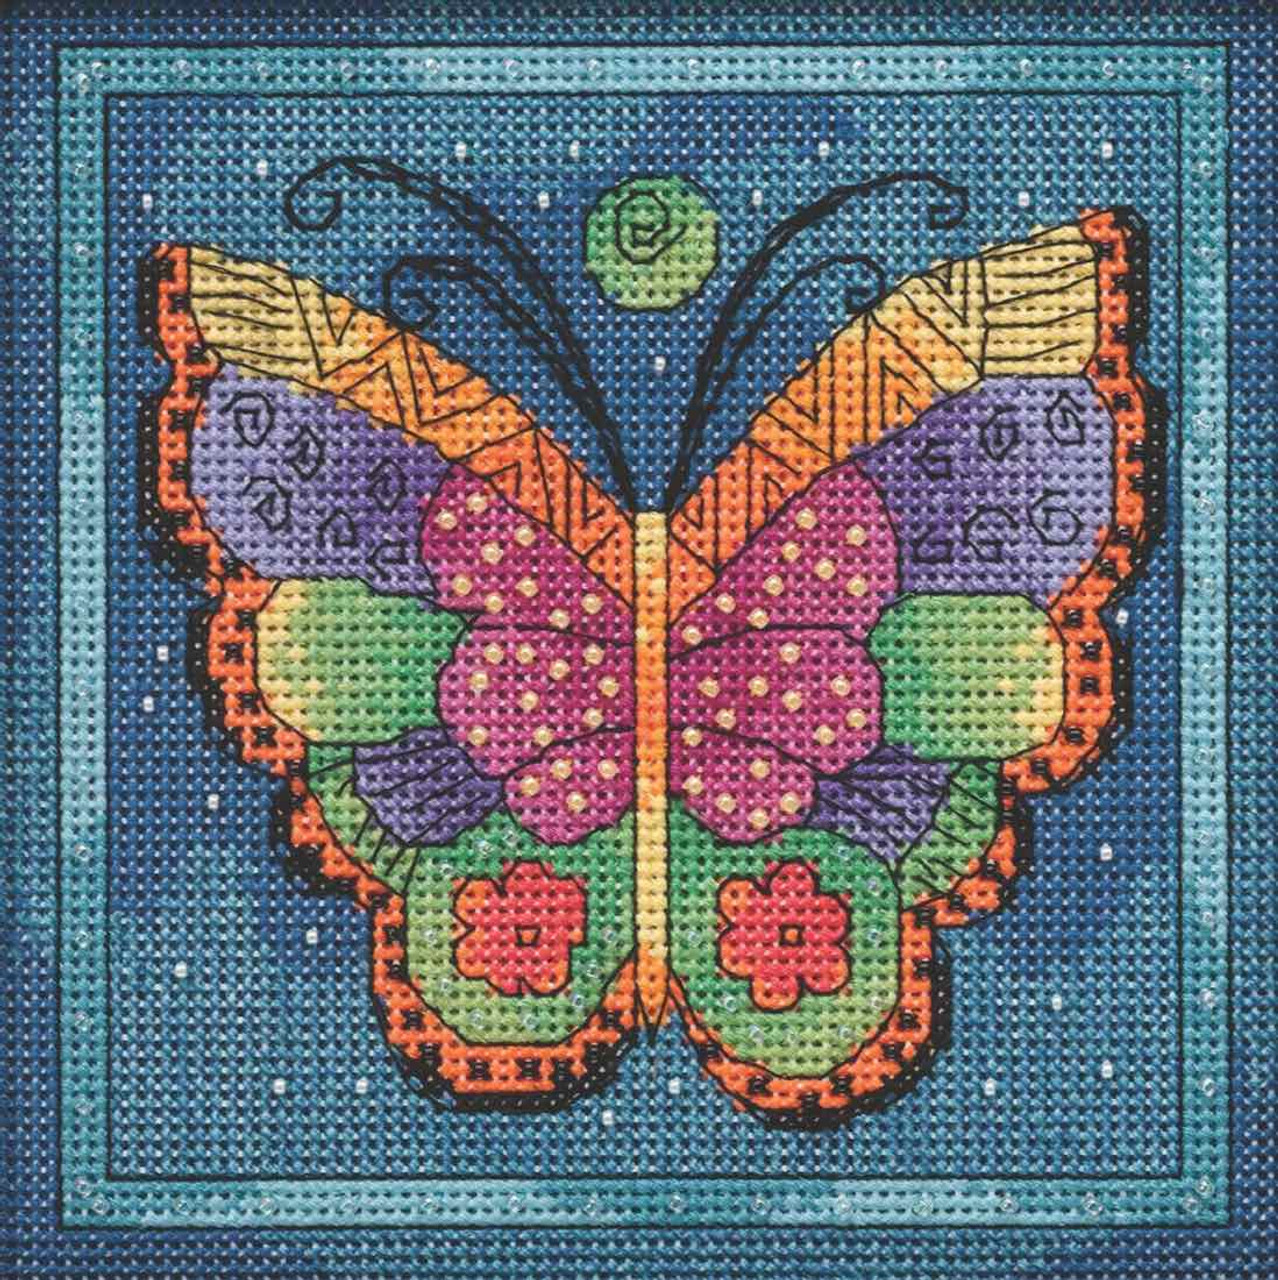 Stitched area of Butterfly Capri Cross Stitch Kit Mill Hill 2019 Laurel Burch Flying Colors LB141914